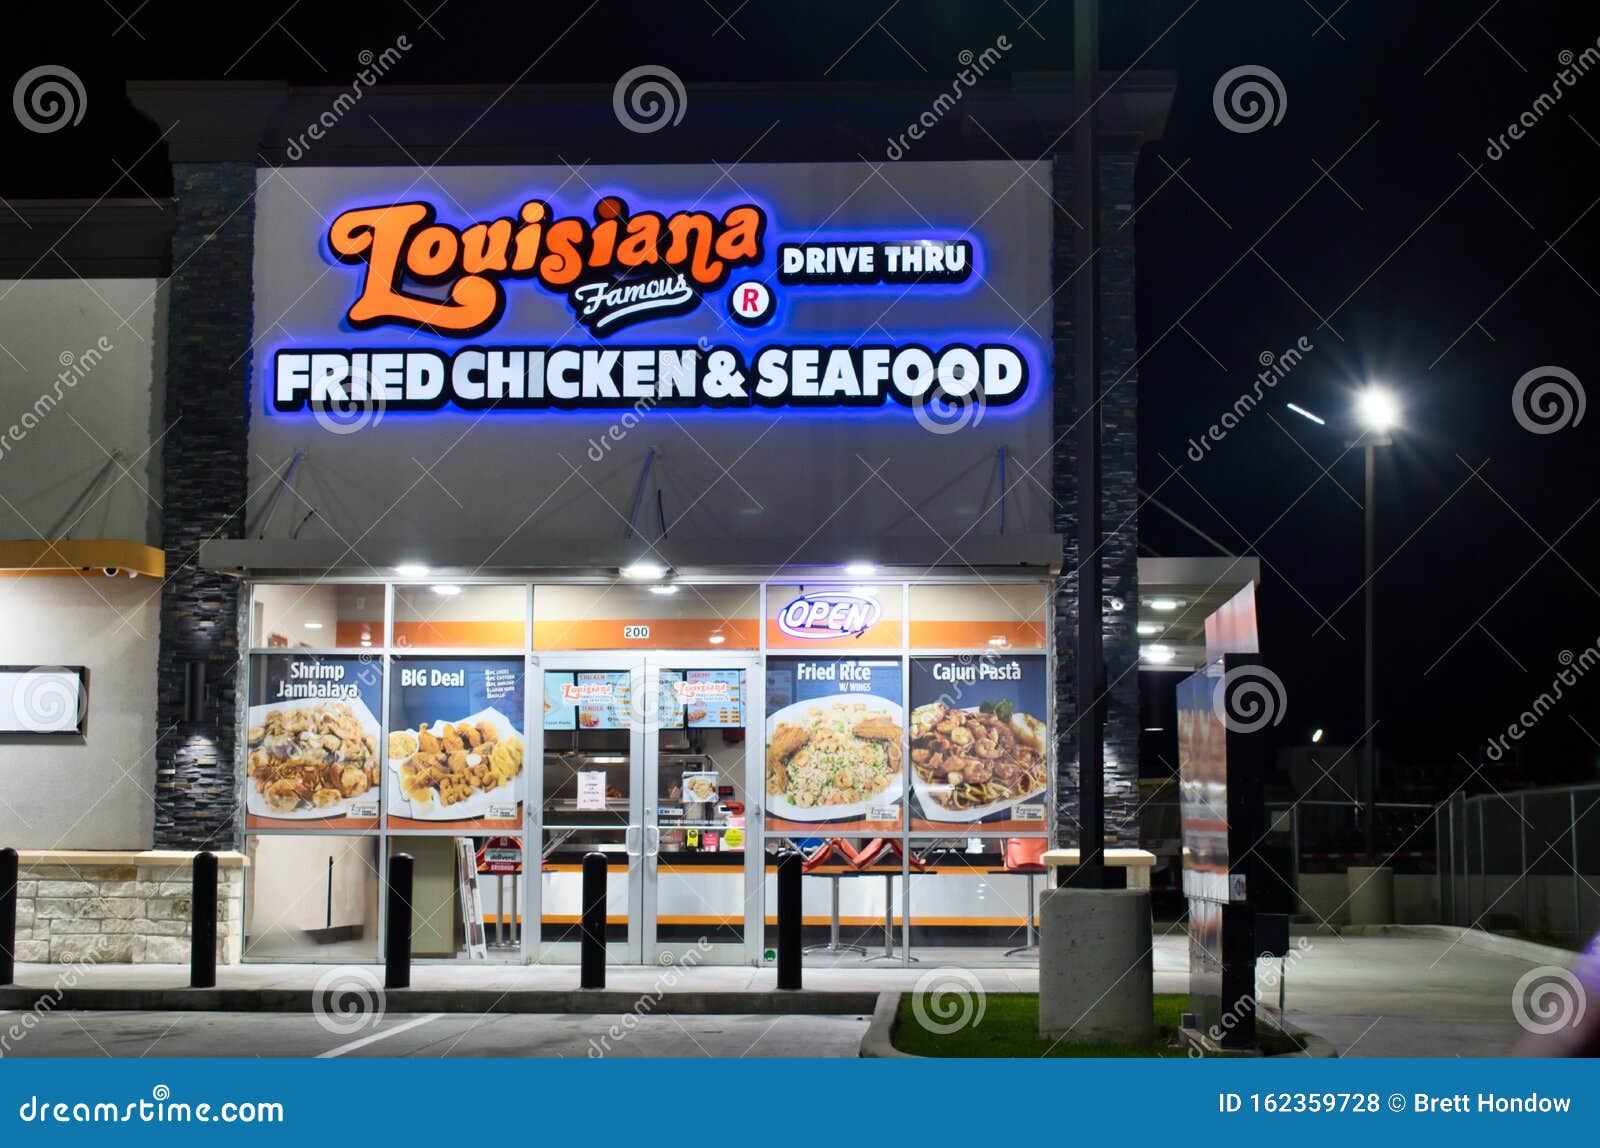 Louisiana Fried Chicken And Seafood Franchise In Humble, Texas. Editorial Stock Photo - Image of ...